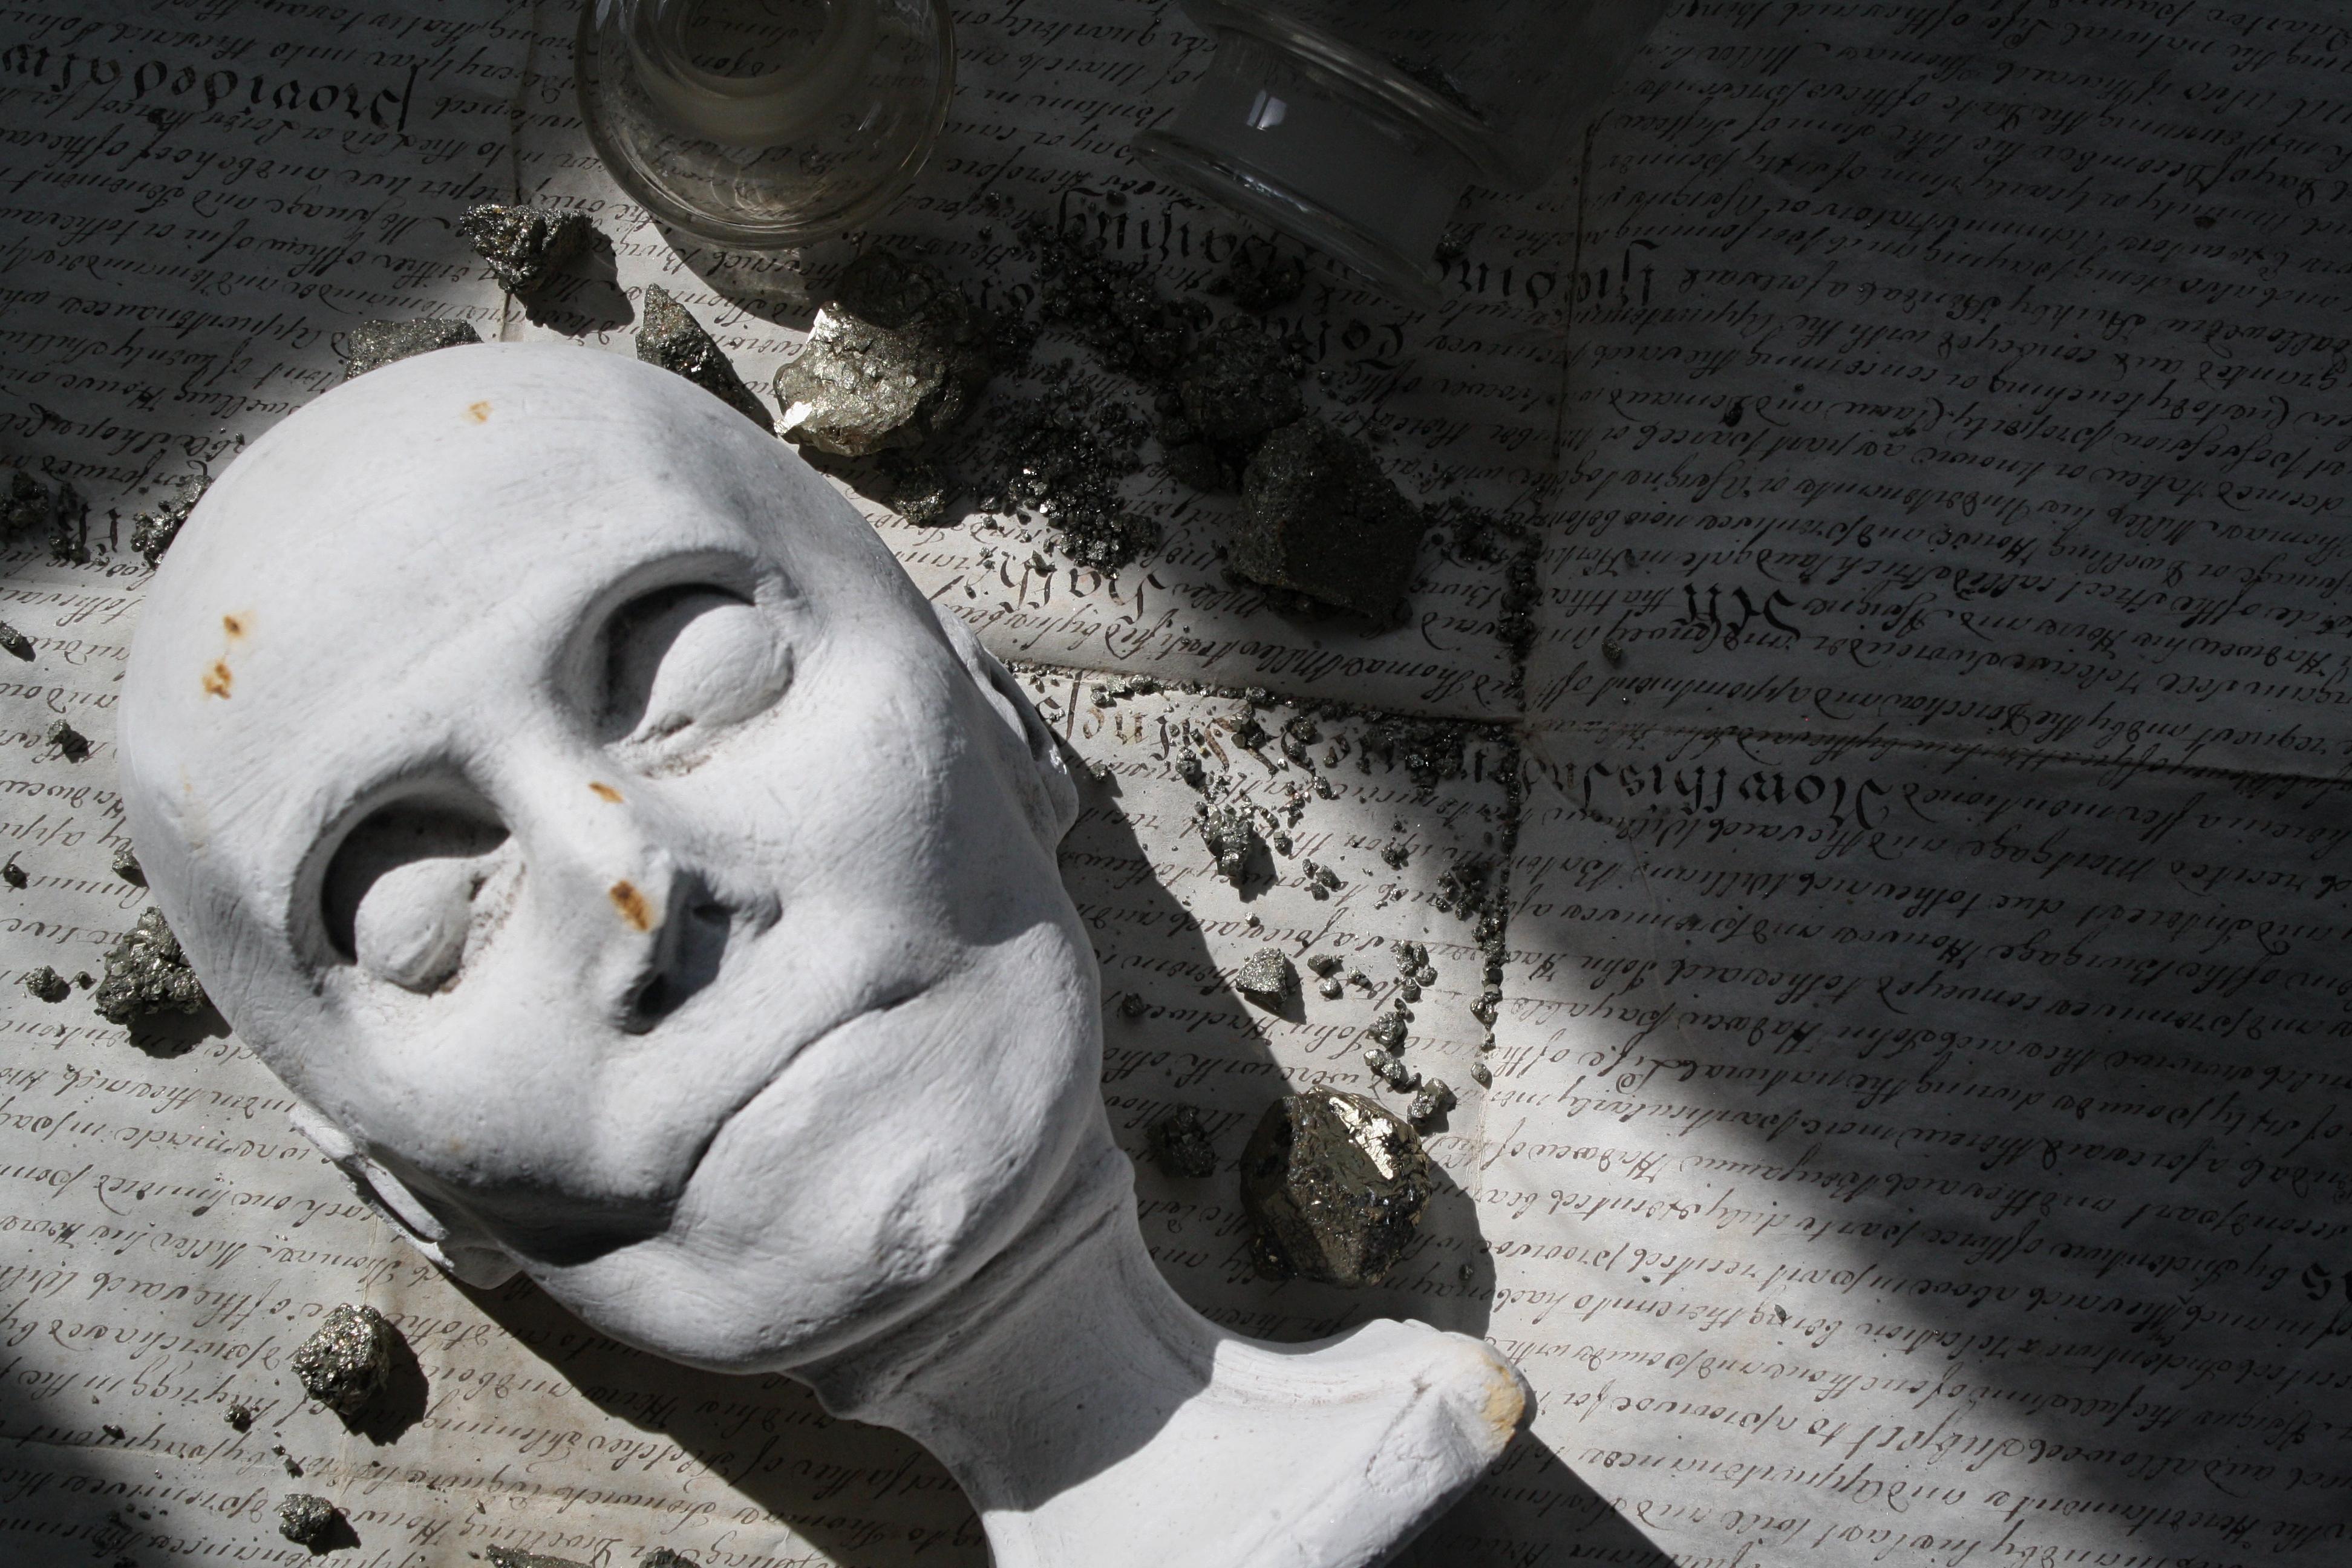 A good example of a 19th century plaster death mask on socle base. 

The subject has deep, plunging eye sockets and gaunt appearance. 

Some elderly damage to the back left section of the base, and the nose unless this was a deformity of the